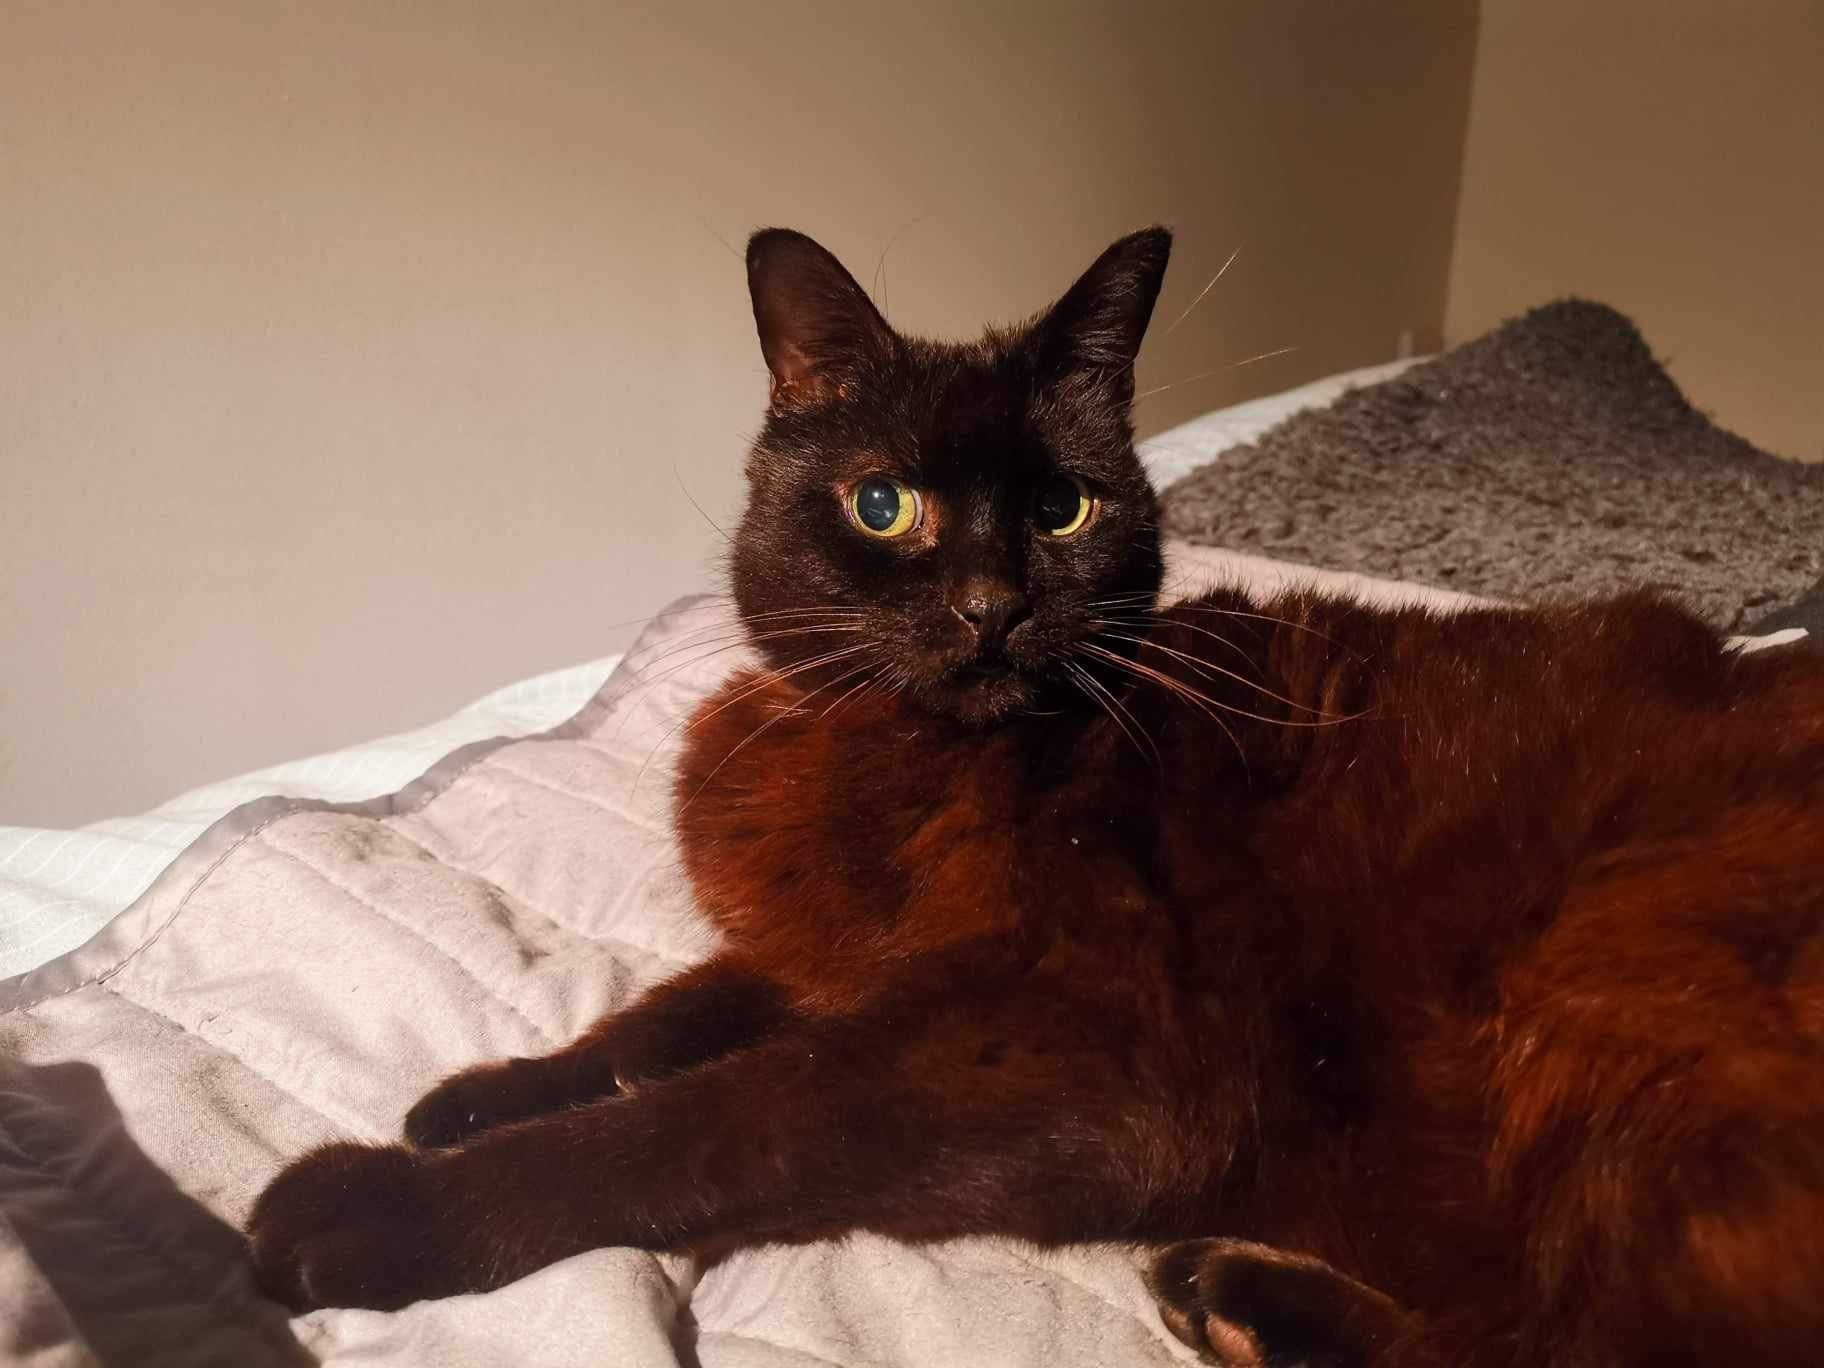 Senior mini panther George looking for loving spacious indoor home with balcony at Catcuddles London